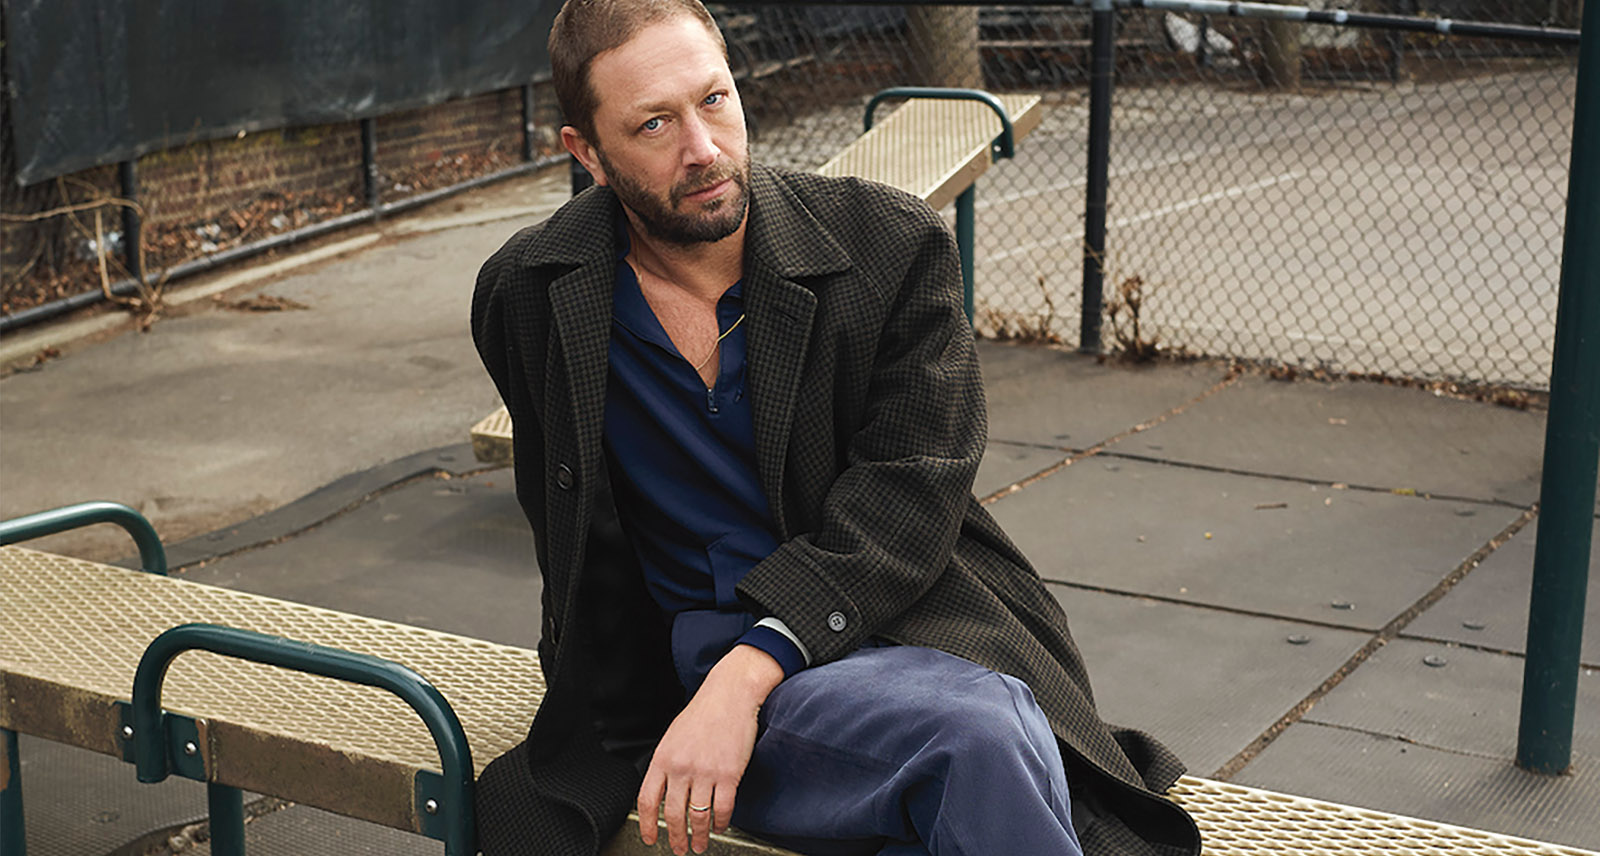 Ebon Moss-Bachrach sits on bench with legs crossed